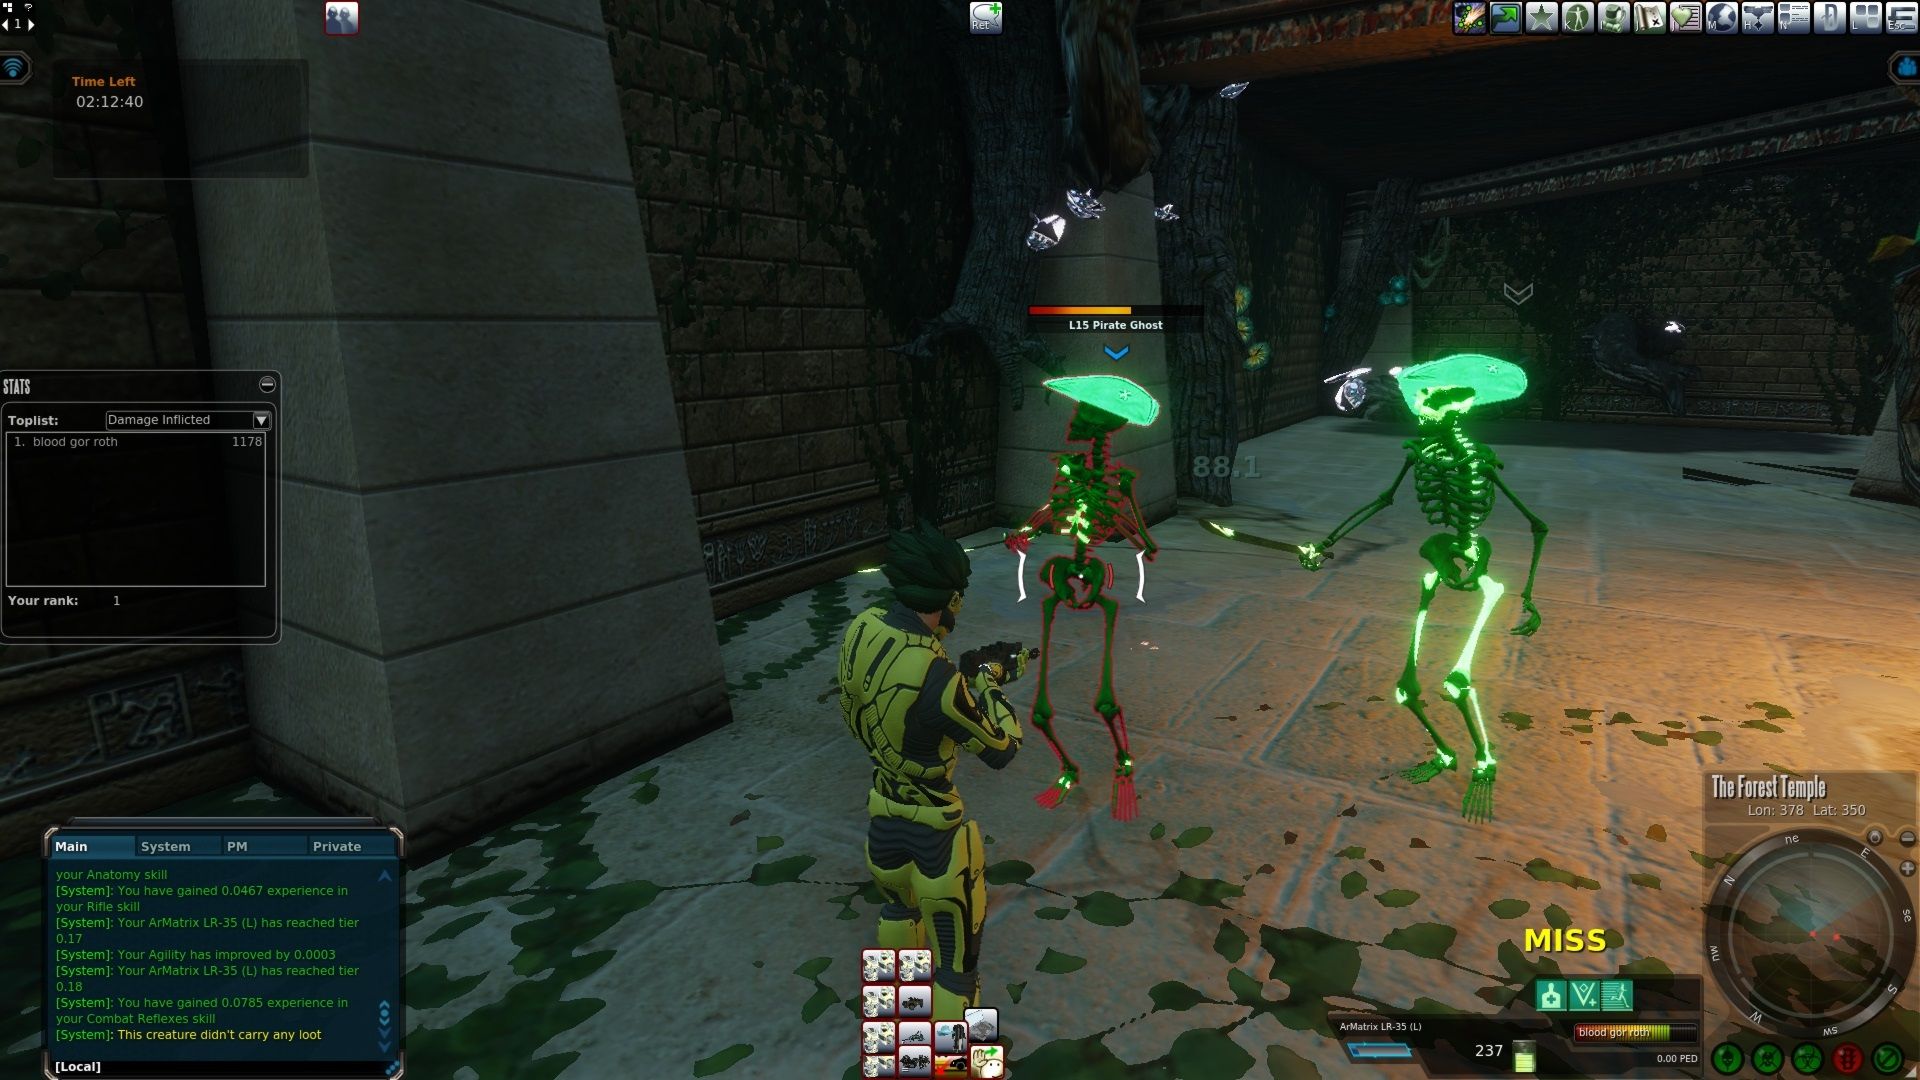 clearing some level 15 pirate ghosts Secret Island Forest Temple Entropia Universe.jpg